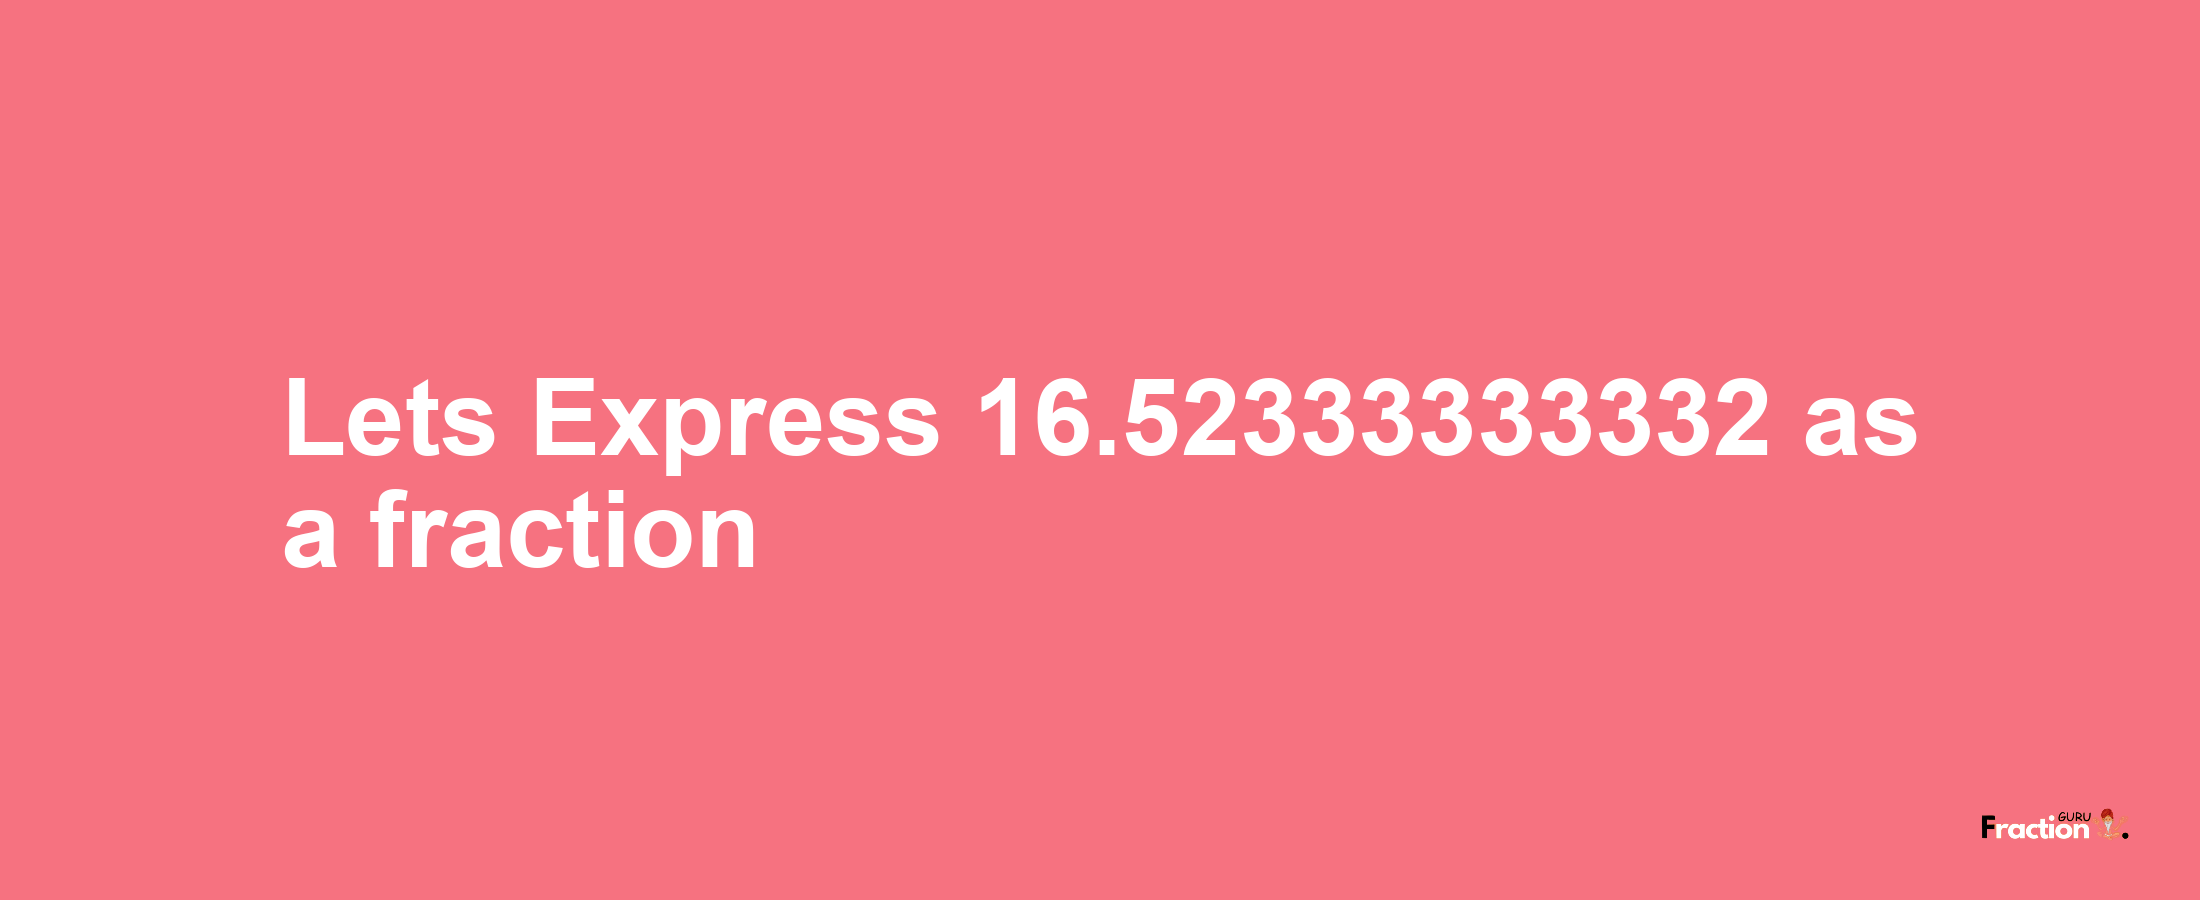 Lets Express 16.52333333332 as afraction